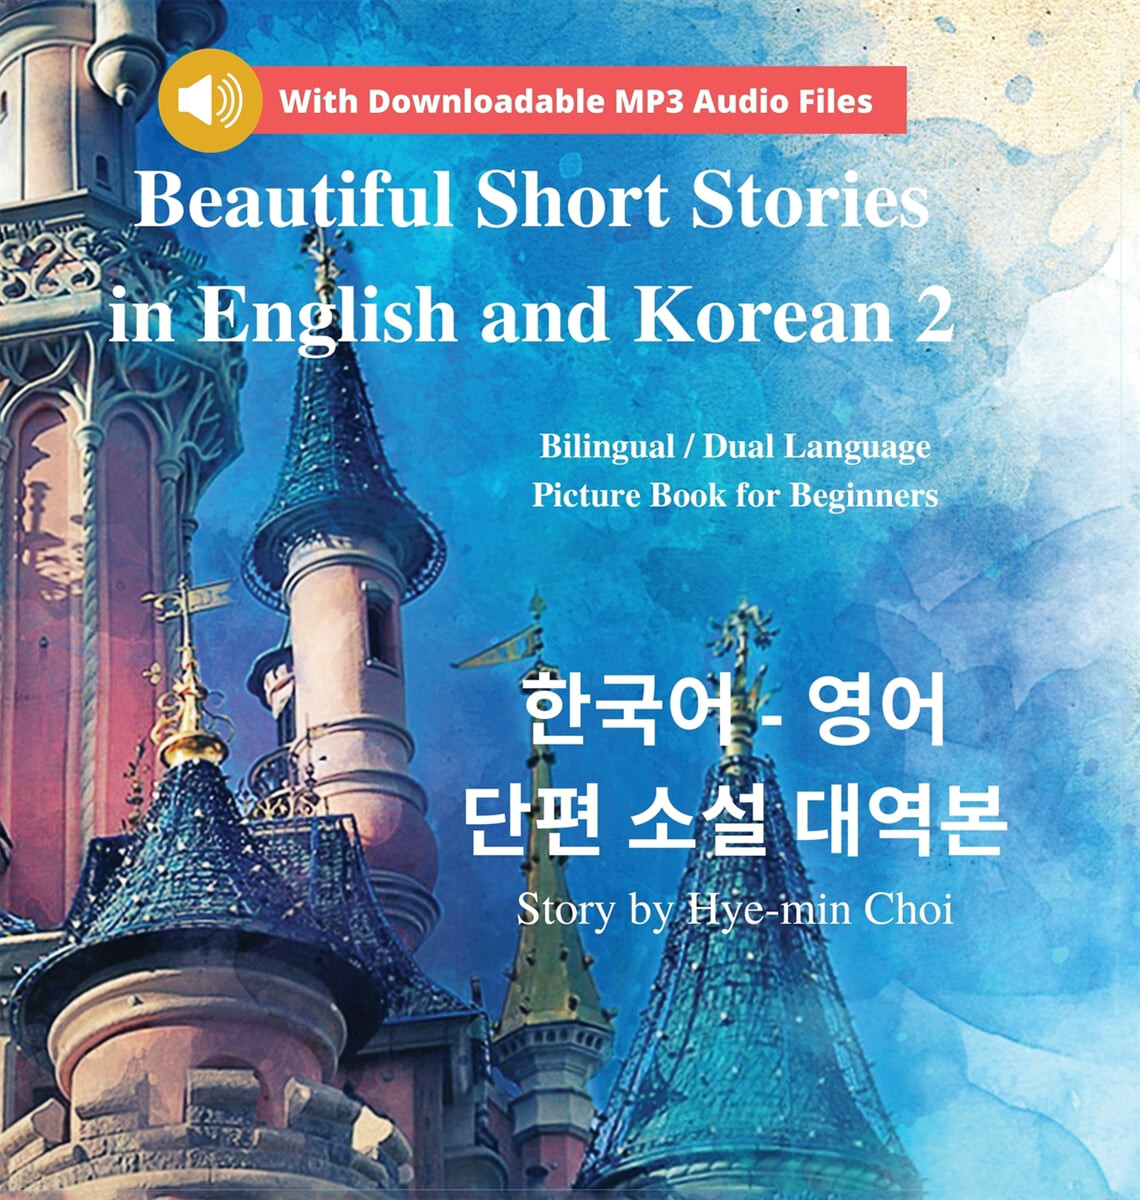 Beautiful Short Stories in English and Korean 2 (With Downloadable MP3 Files) (Bilingual / Dual Language Picture Book for Beginners)